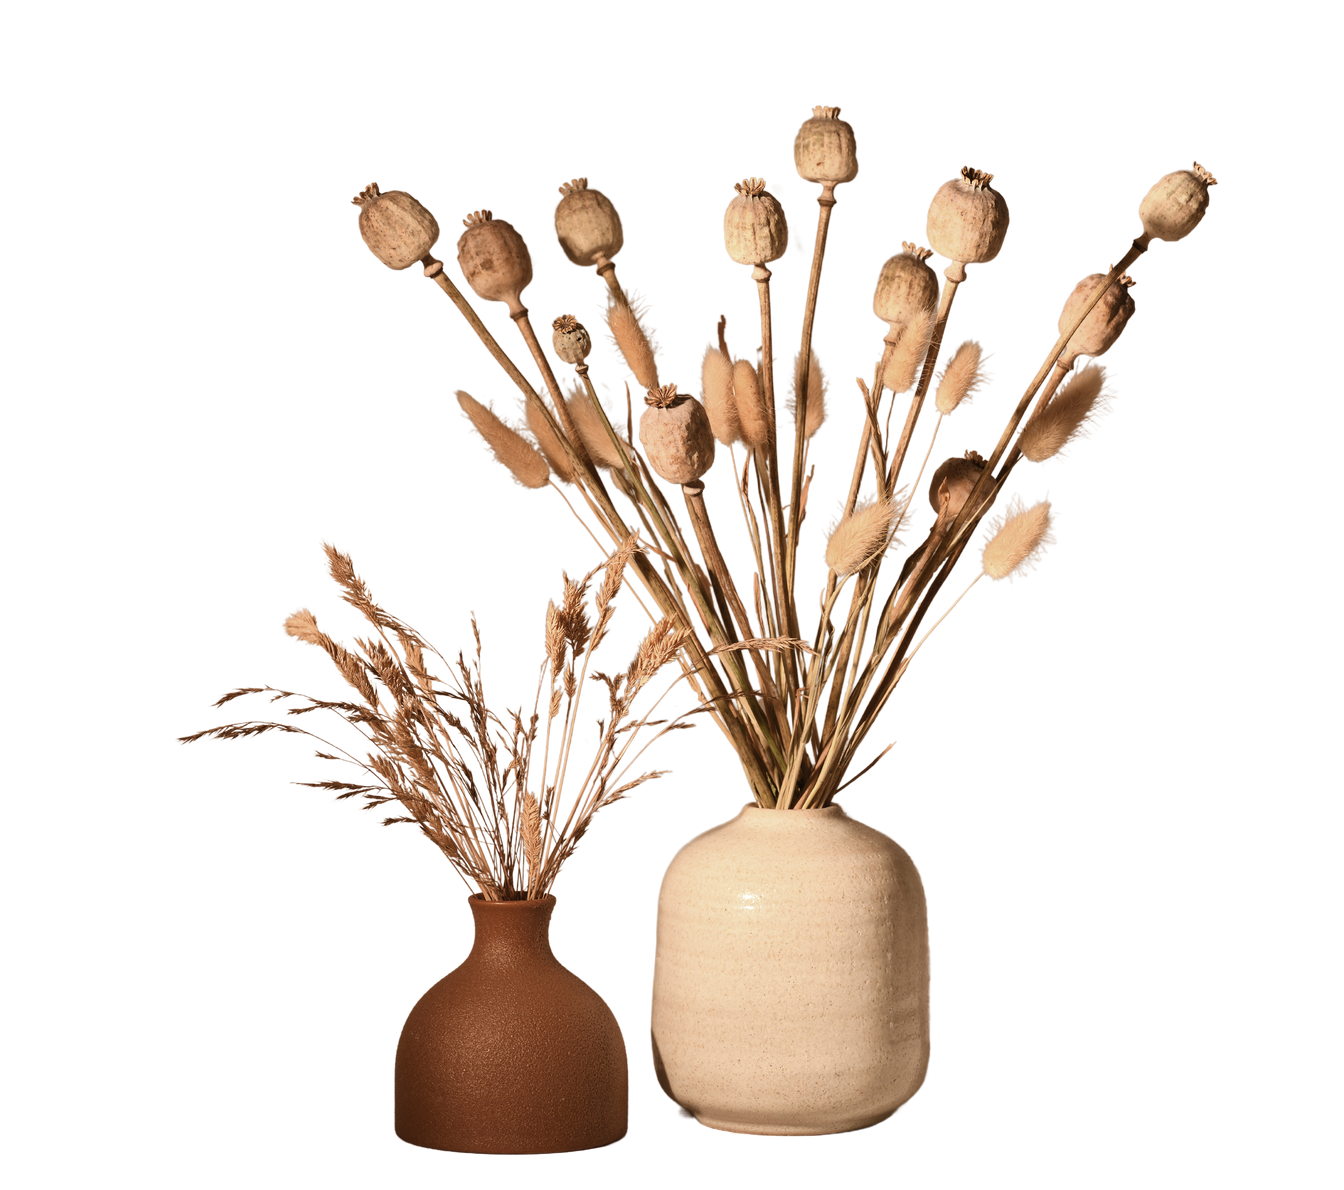 Vases with Dried Plants